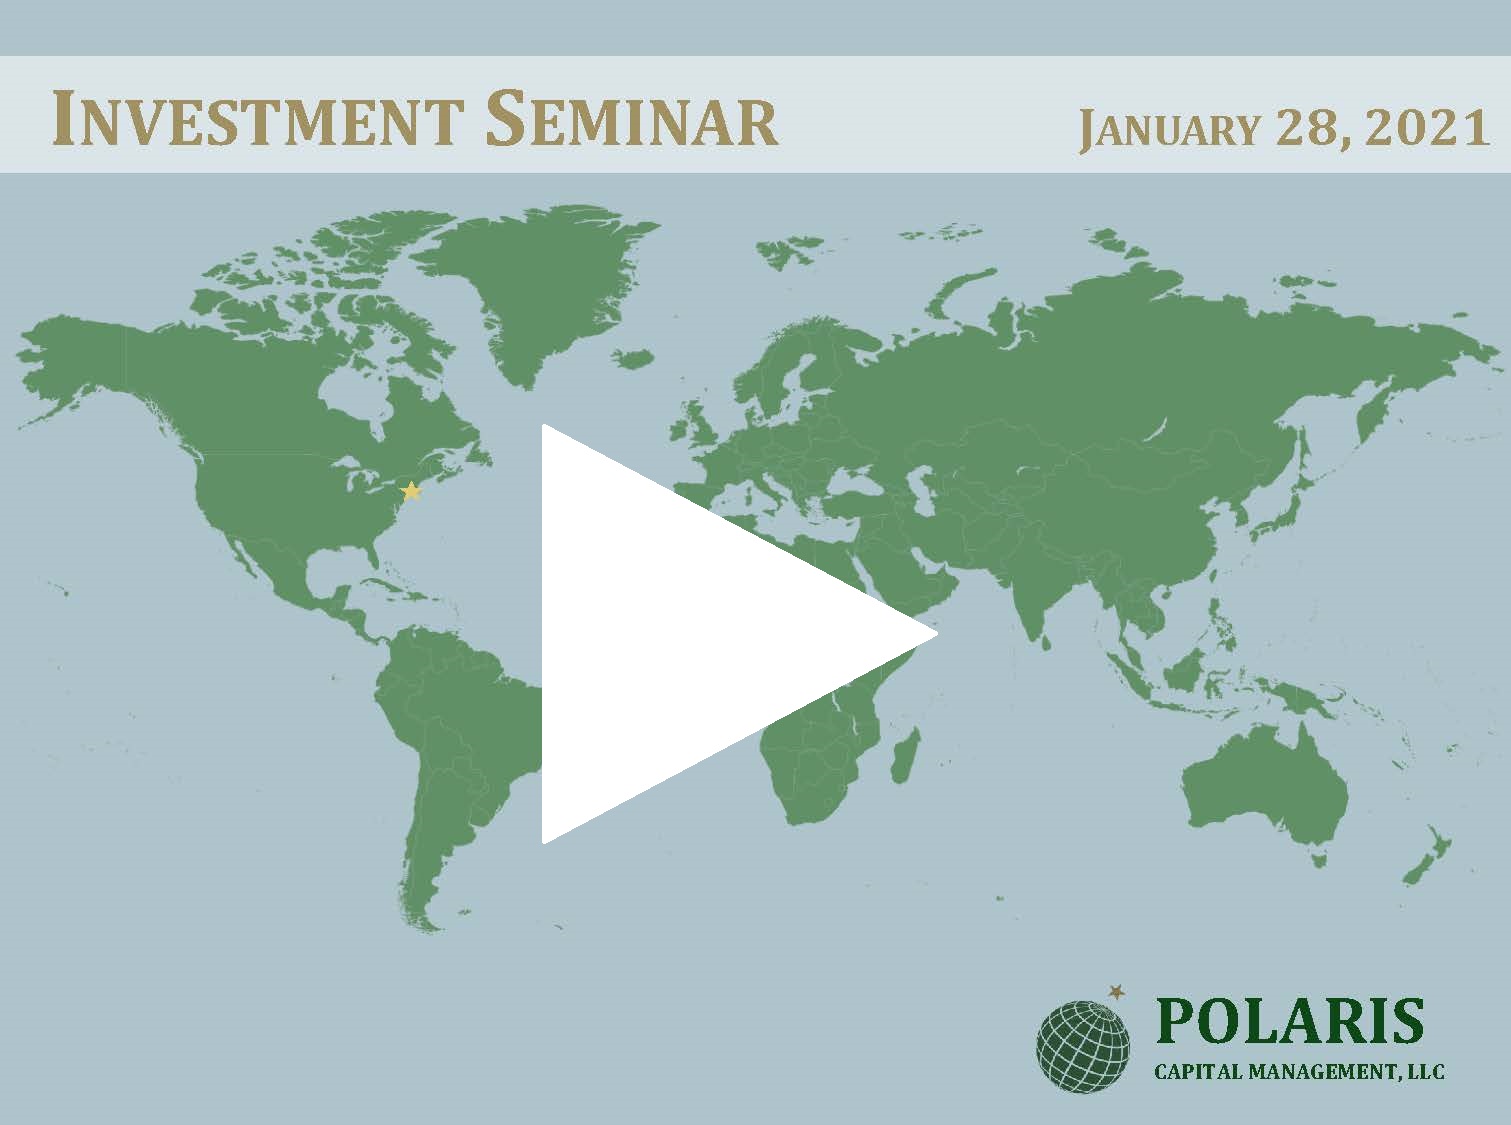 Click here to watch our 2021 Polaris Investment Seminar